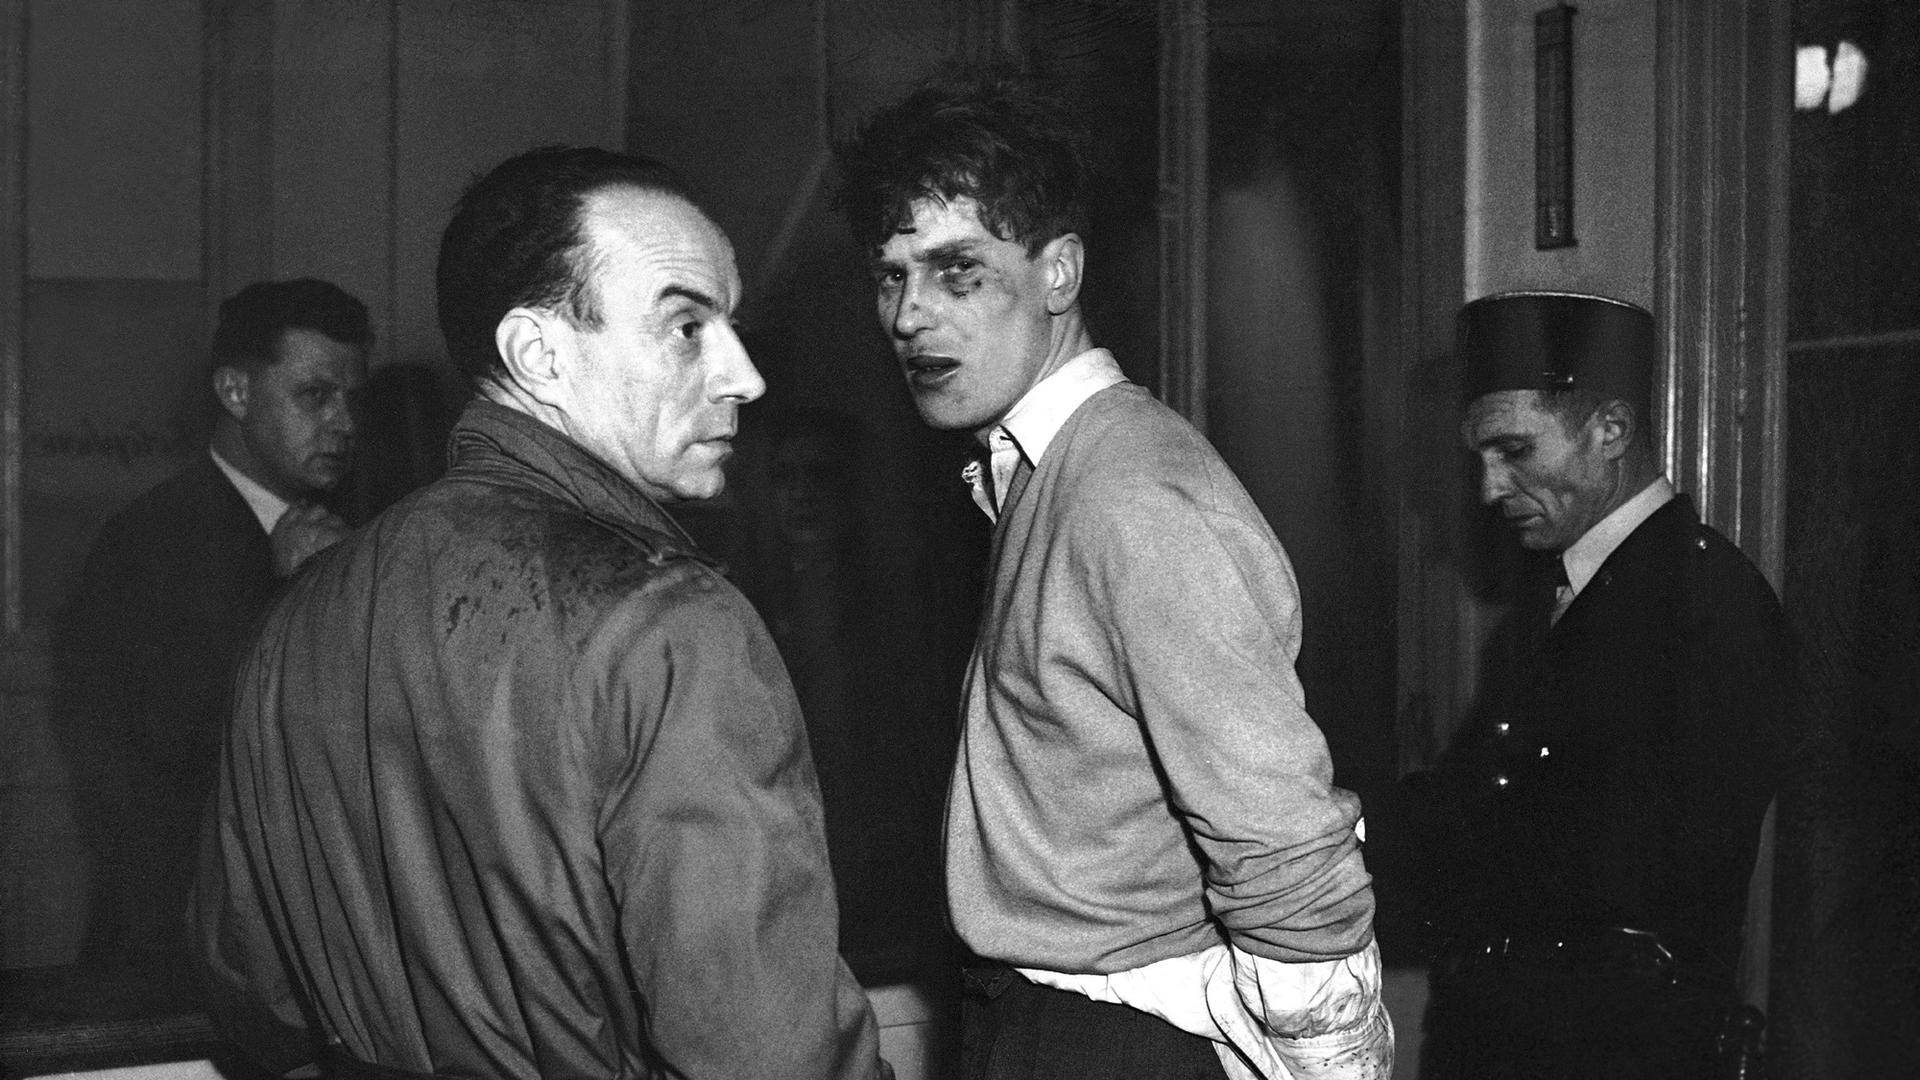 Jacques Fesch was arrested in Paris on February 25, 1954 after having committed a hold-up at a currency exchange stand. While fleeing the scene, he killed a policeman and wounded three persons.